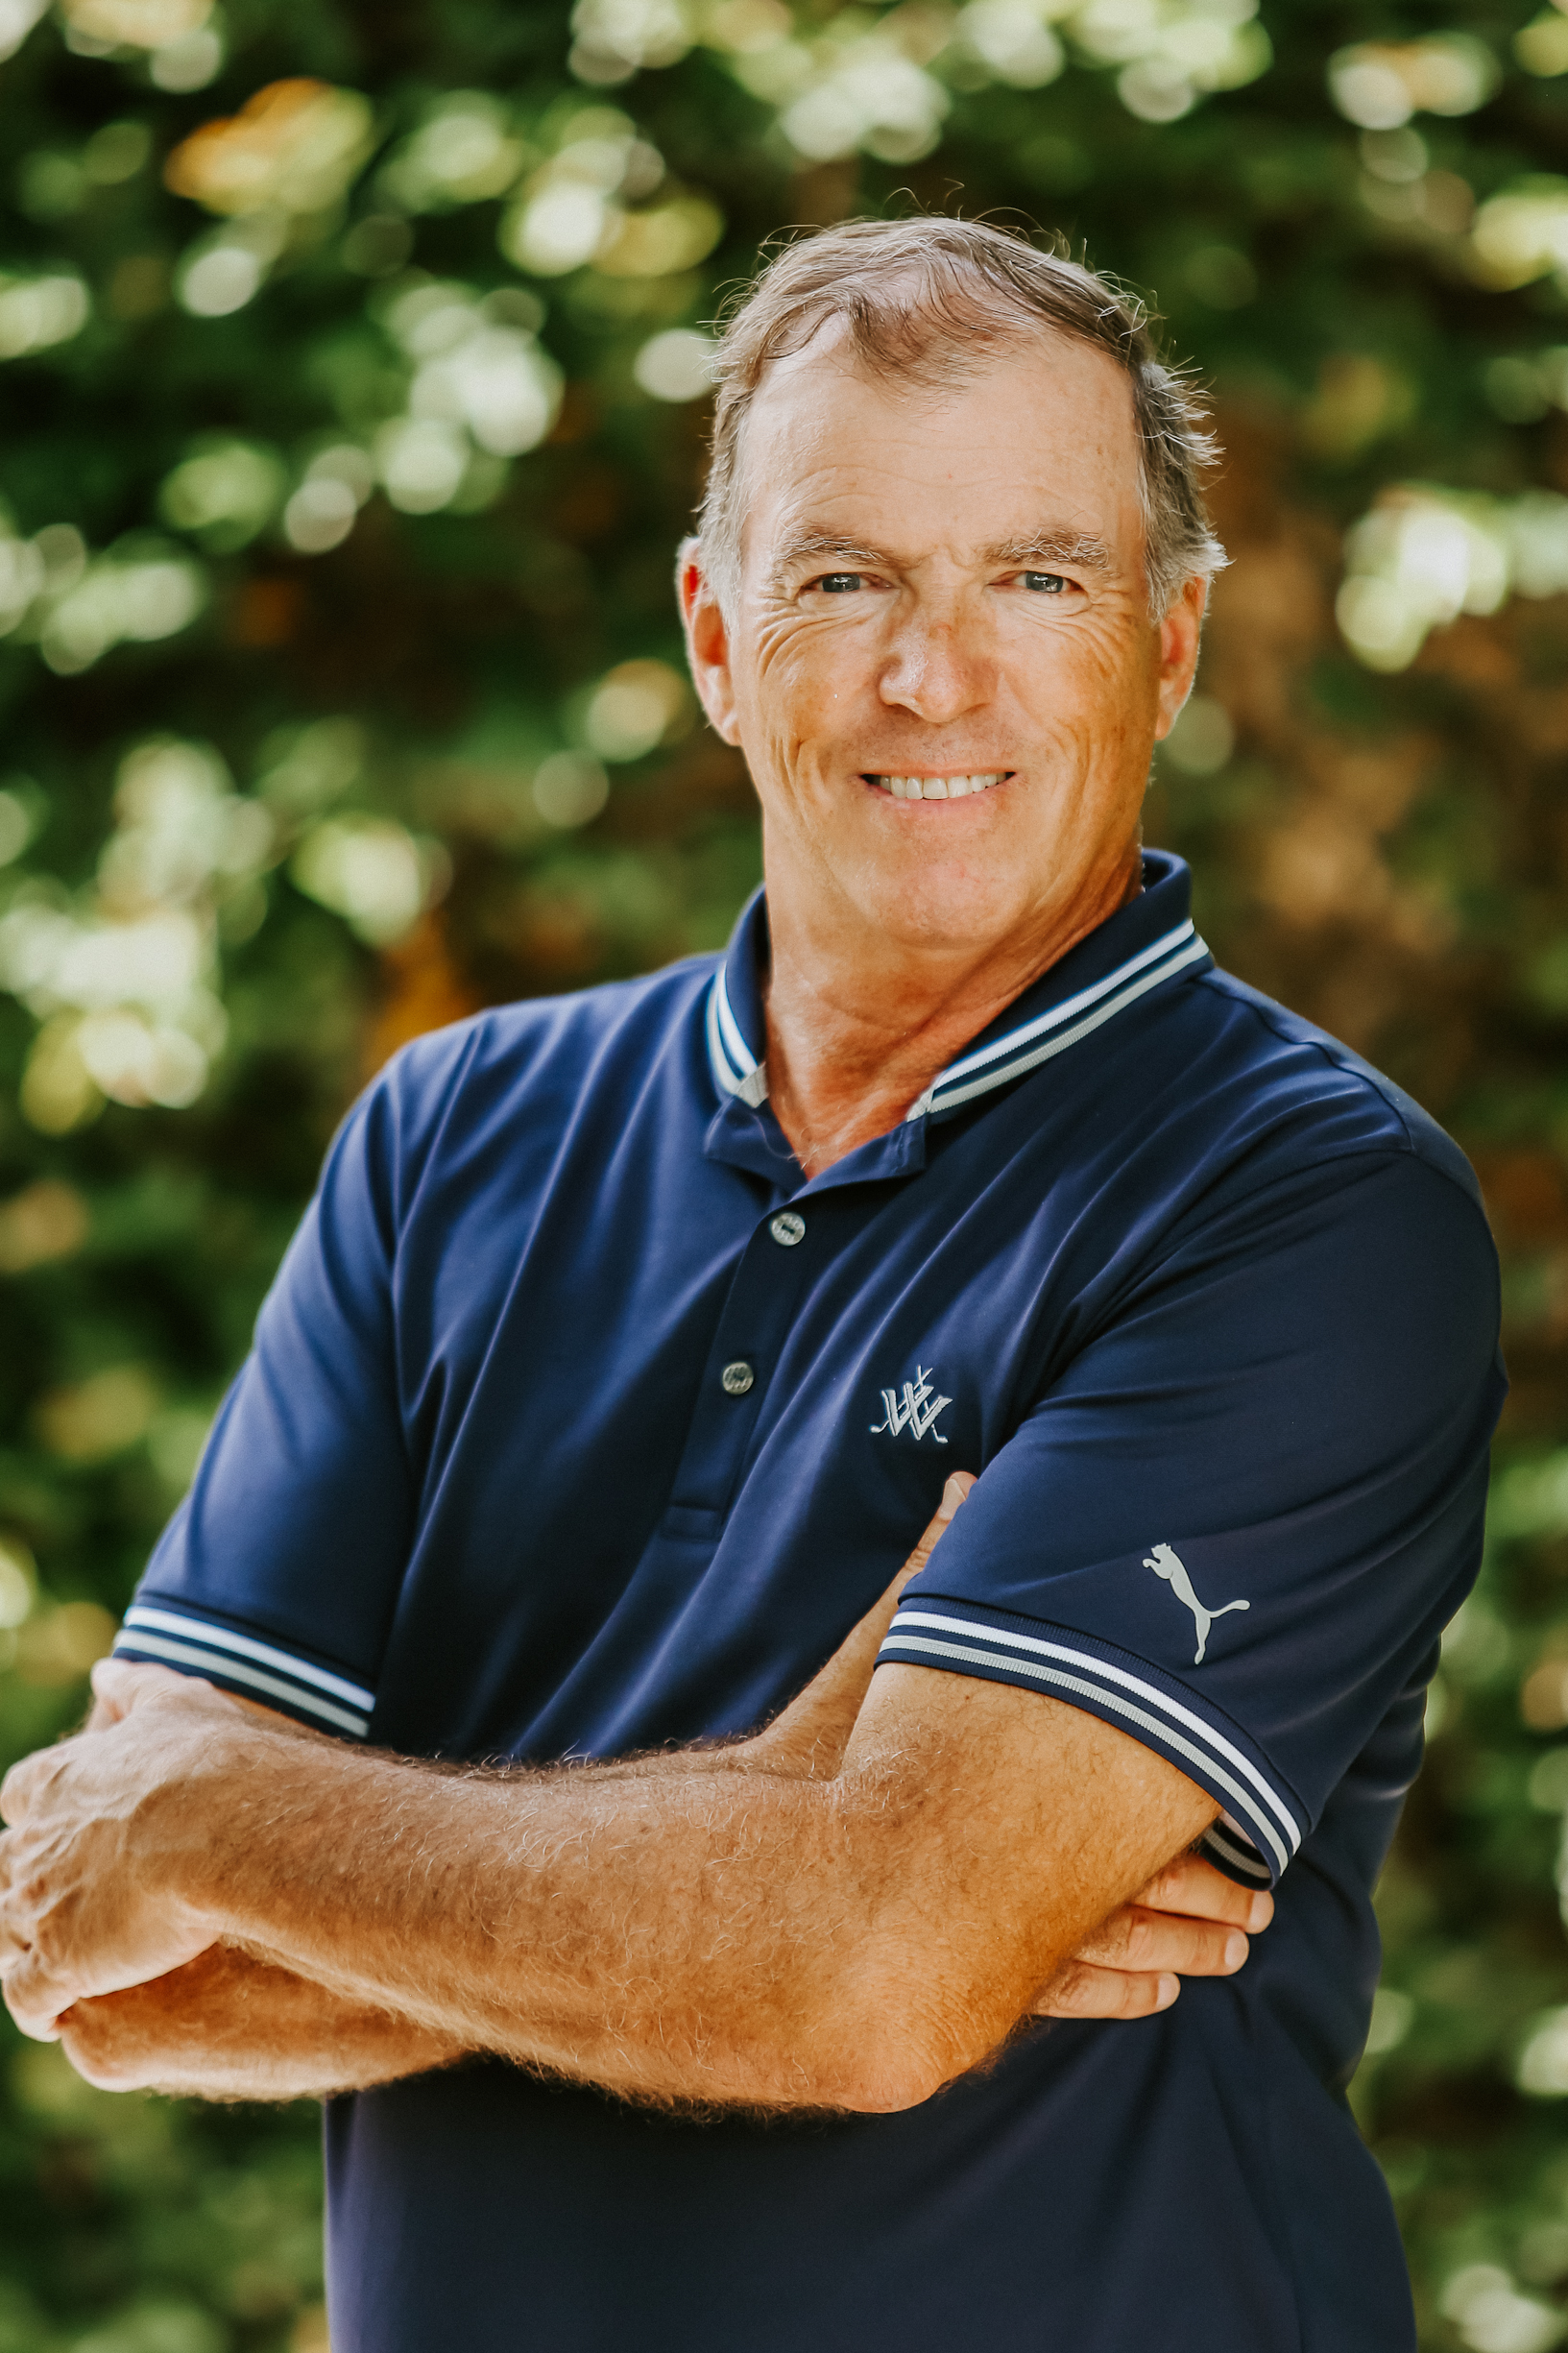 Meet Gerry , Director of Golf for Willoughby Golf Club in Stuart, Florida